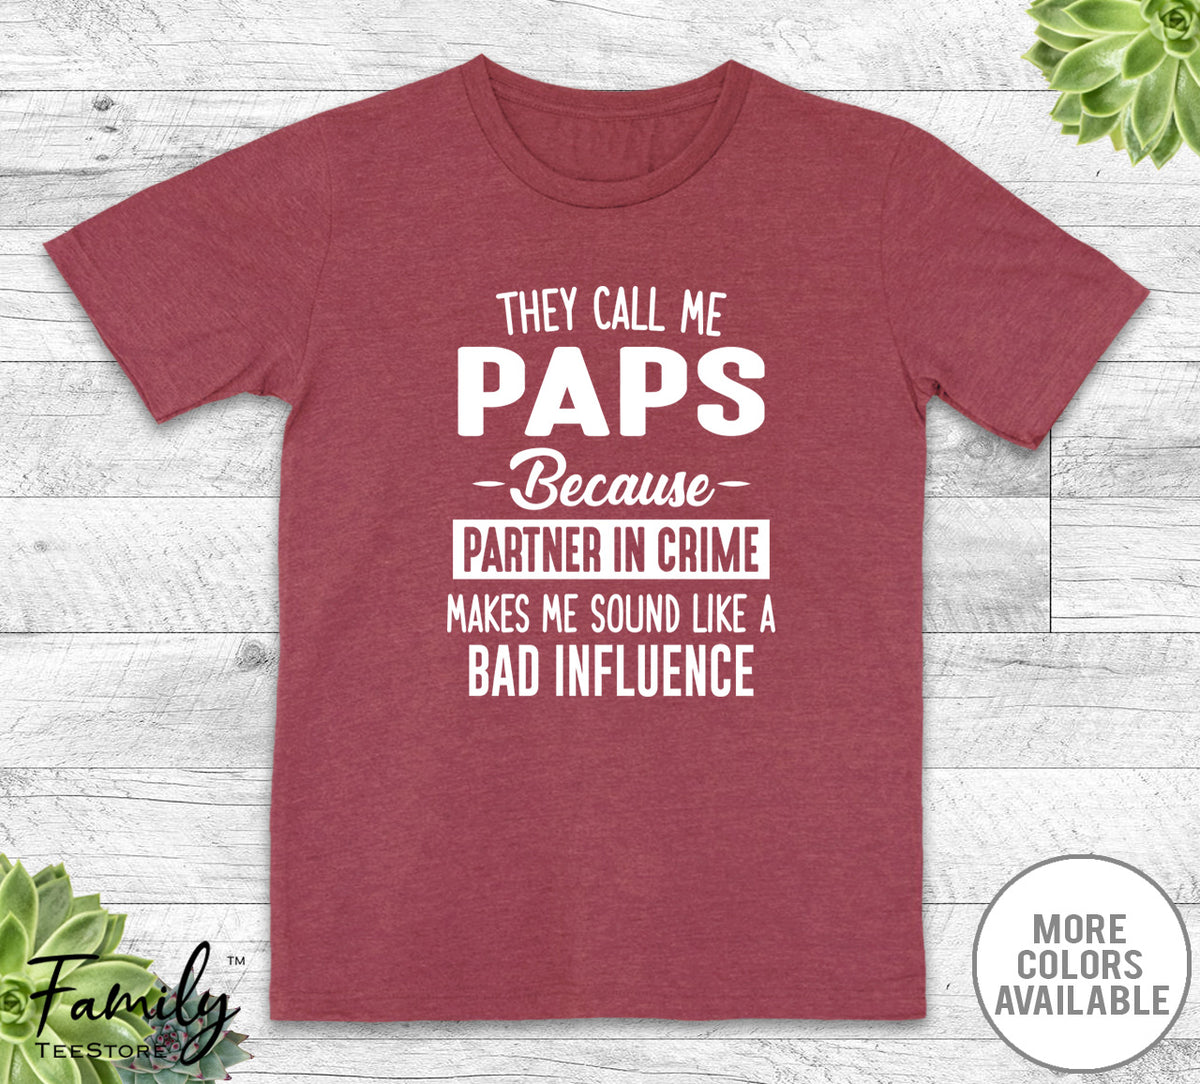 They Call Me Paps Because Partner In Crime... - Unisex T-shirt - Paps Shirt - Paps Gift